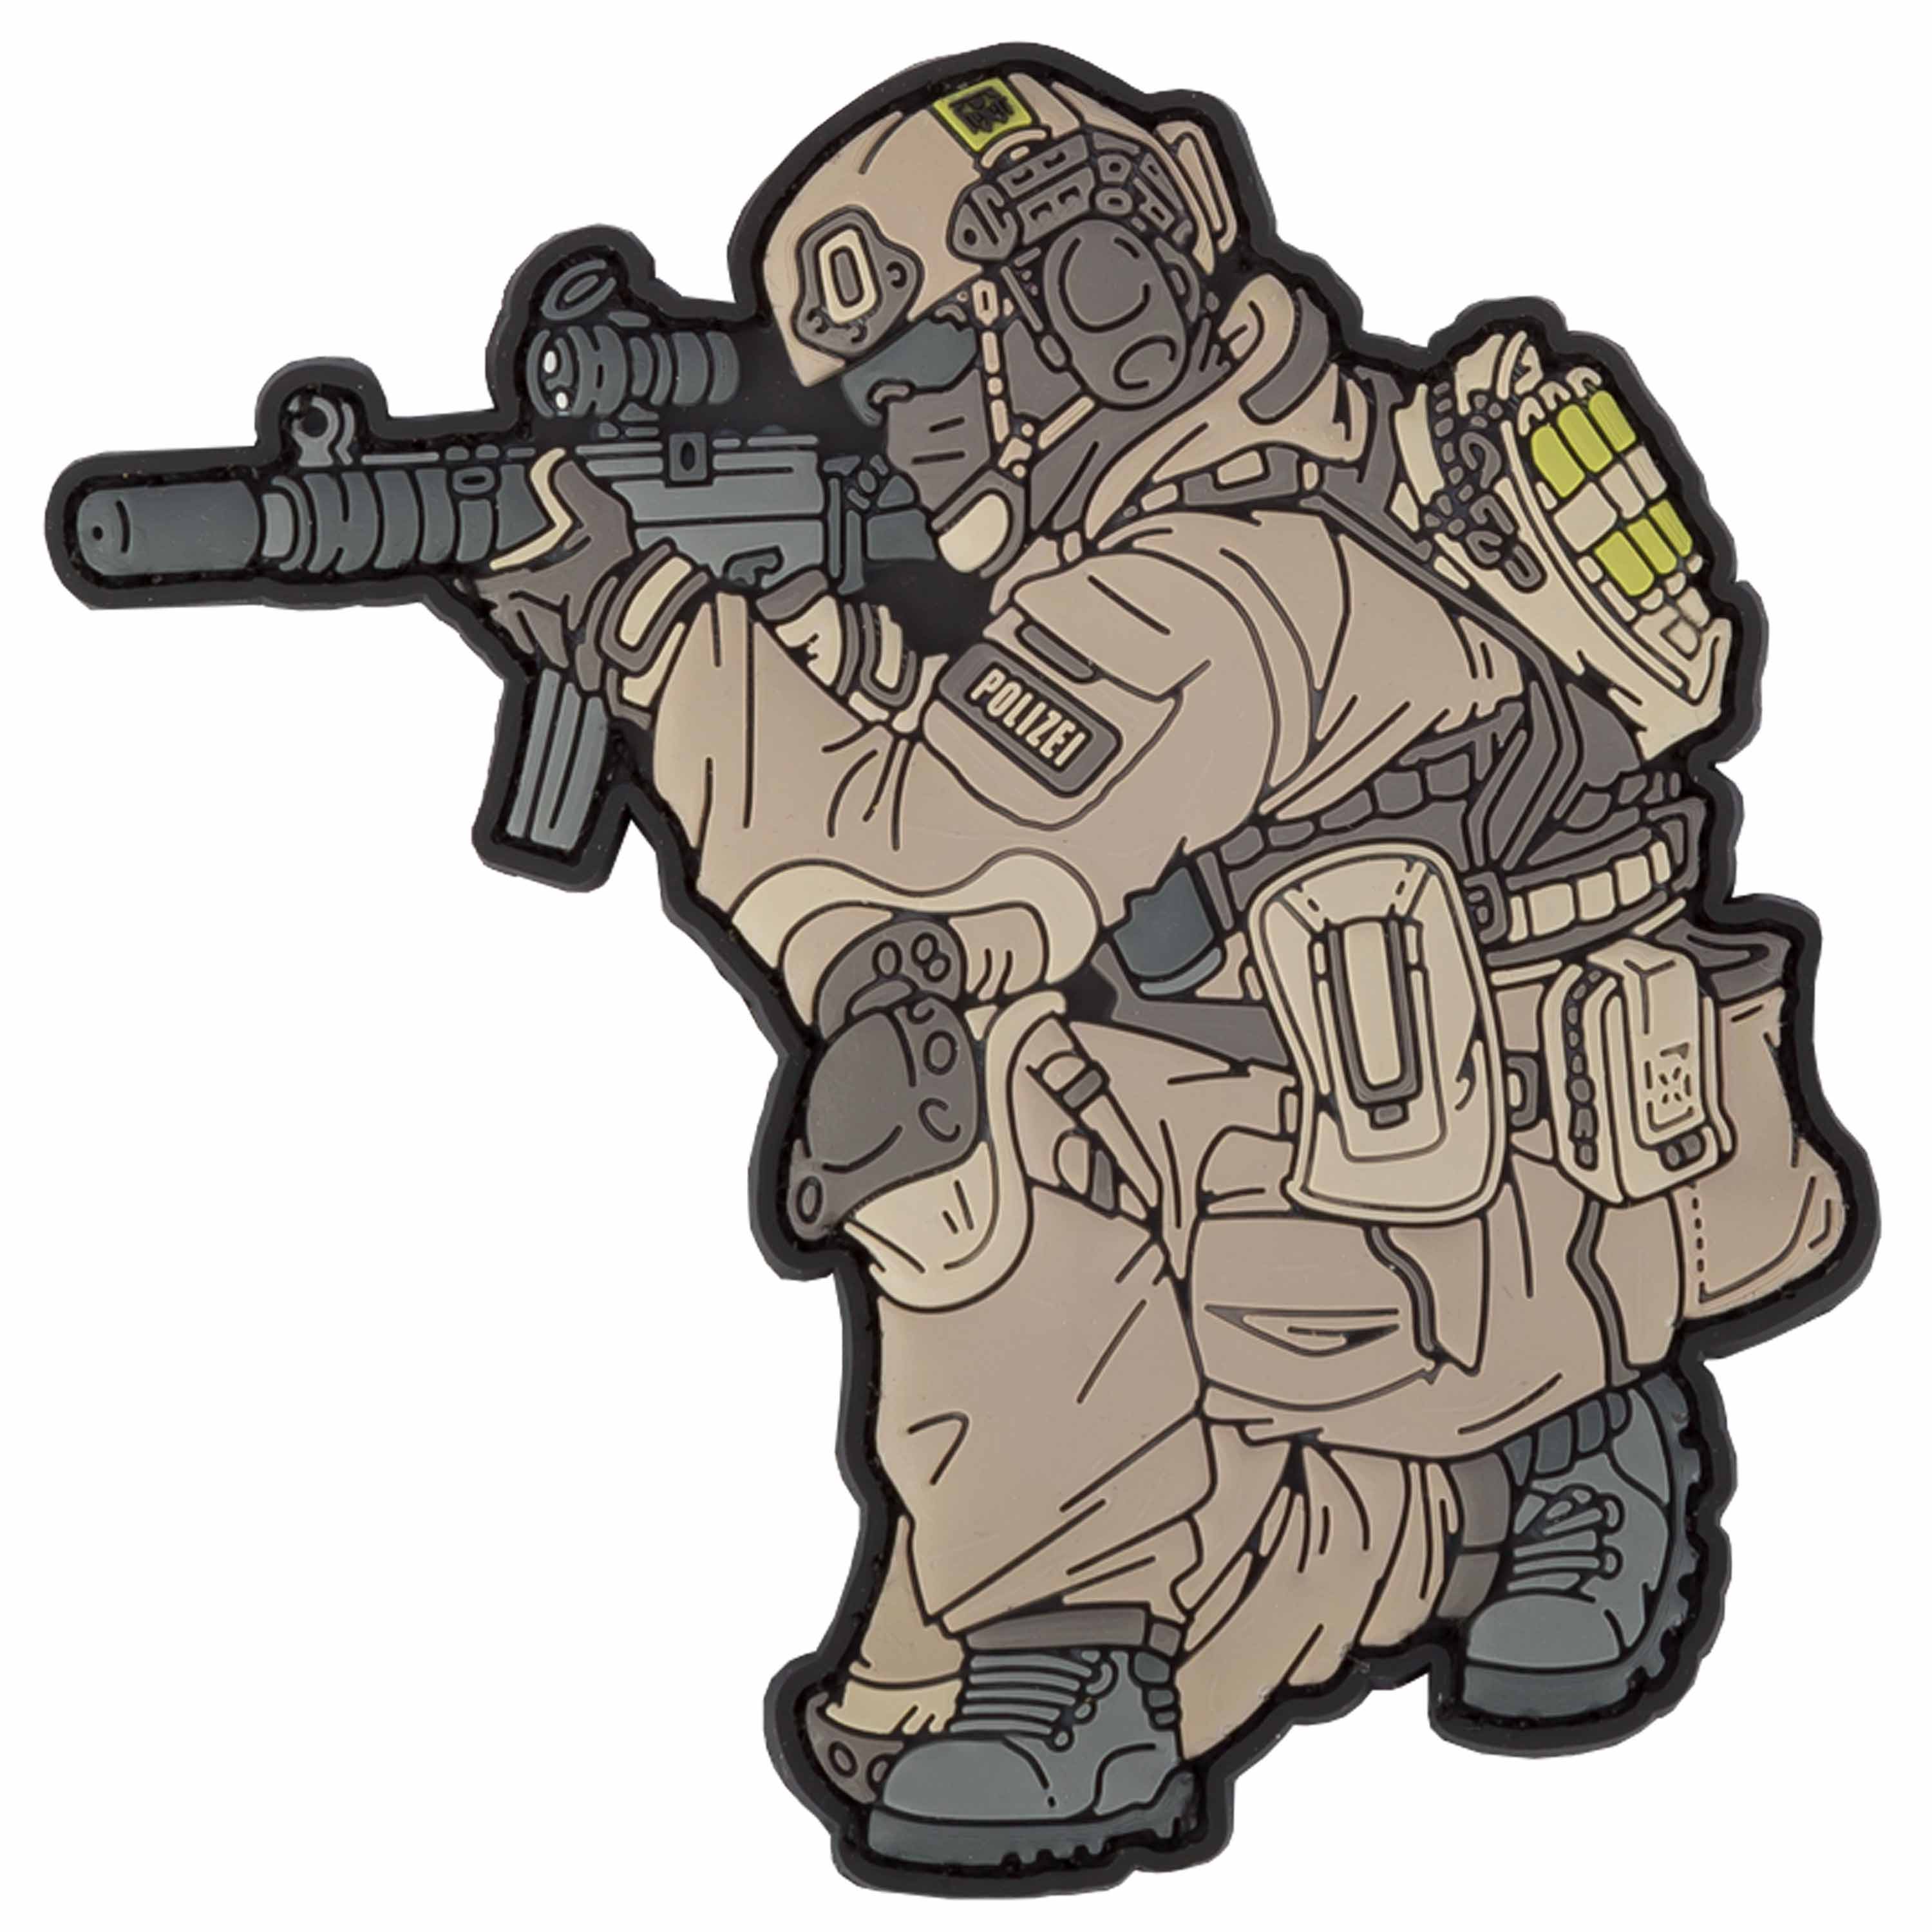 Purchase the TacOpsGear Patch 3D PVC SOF Operator GSG 9 Polizei